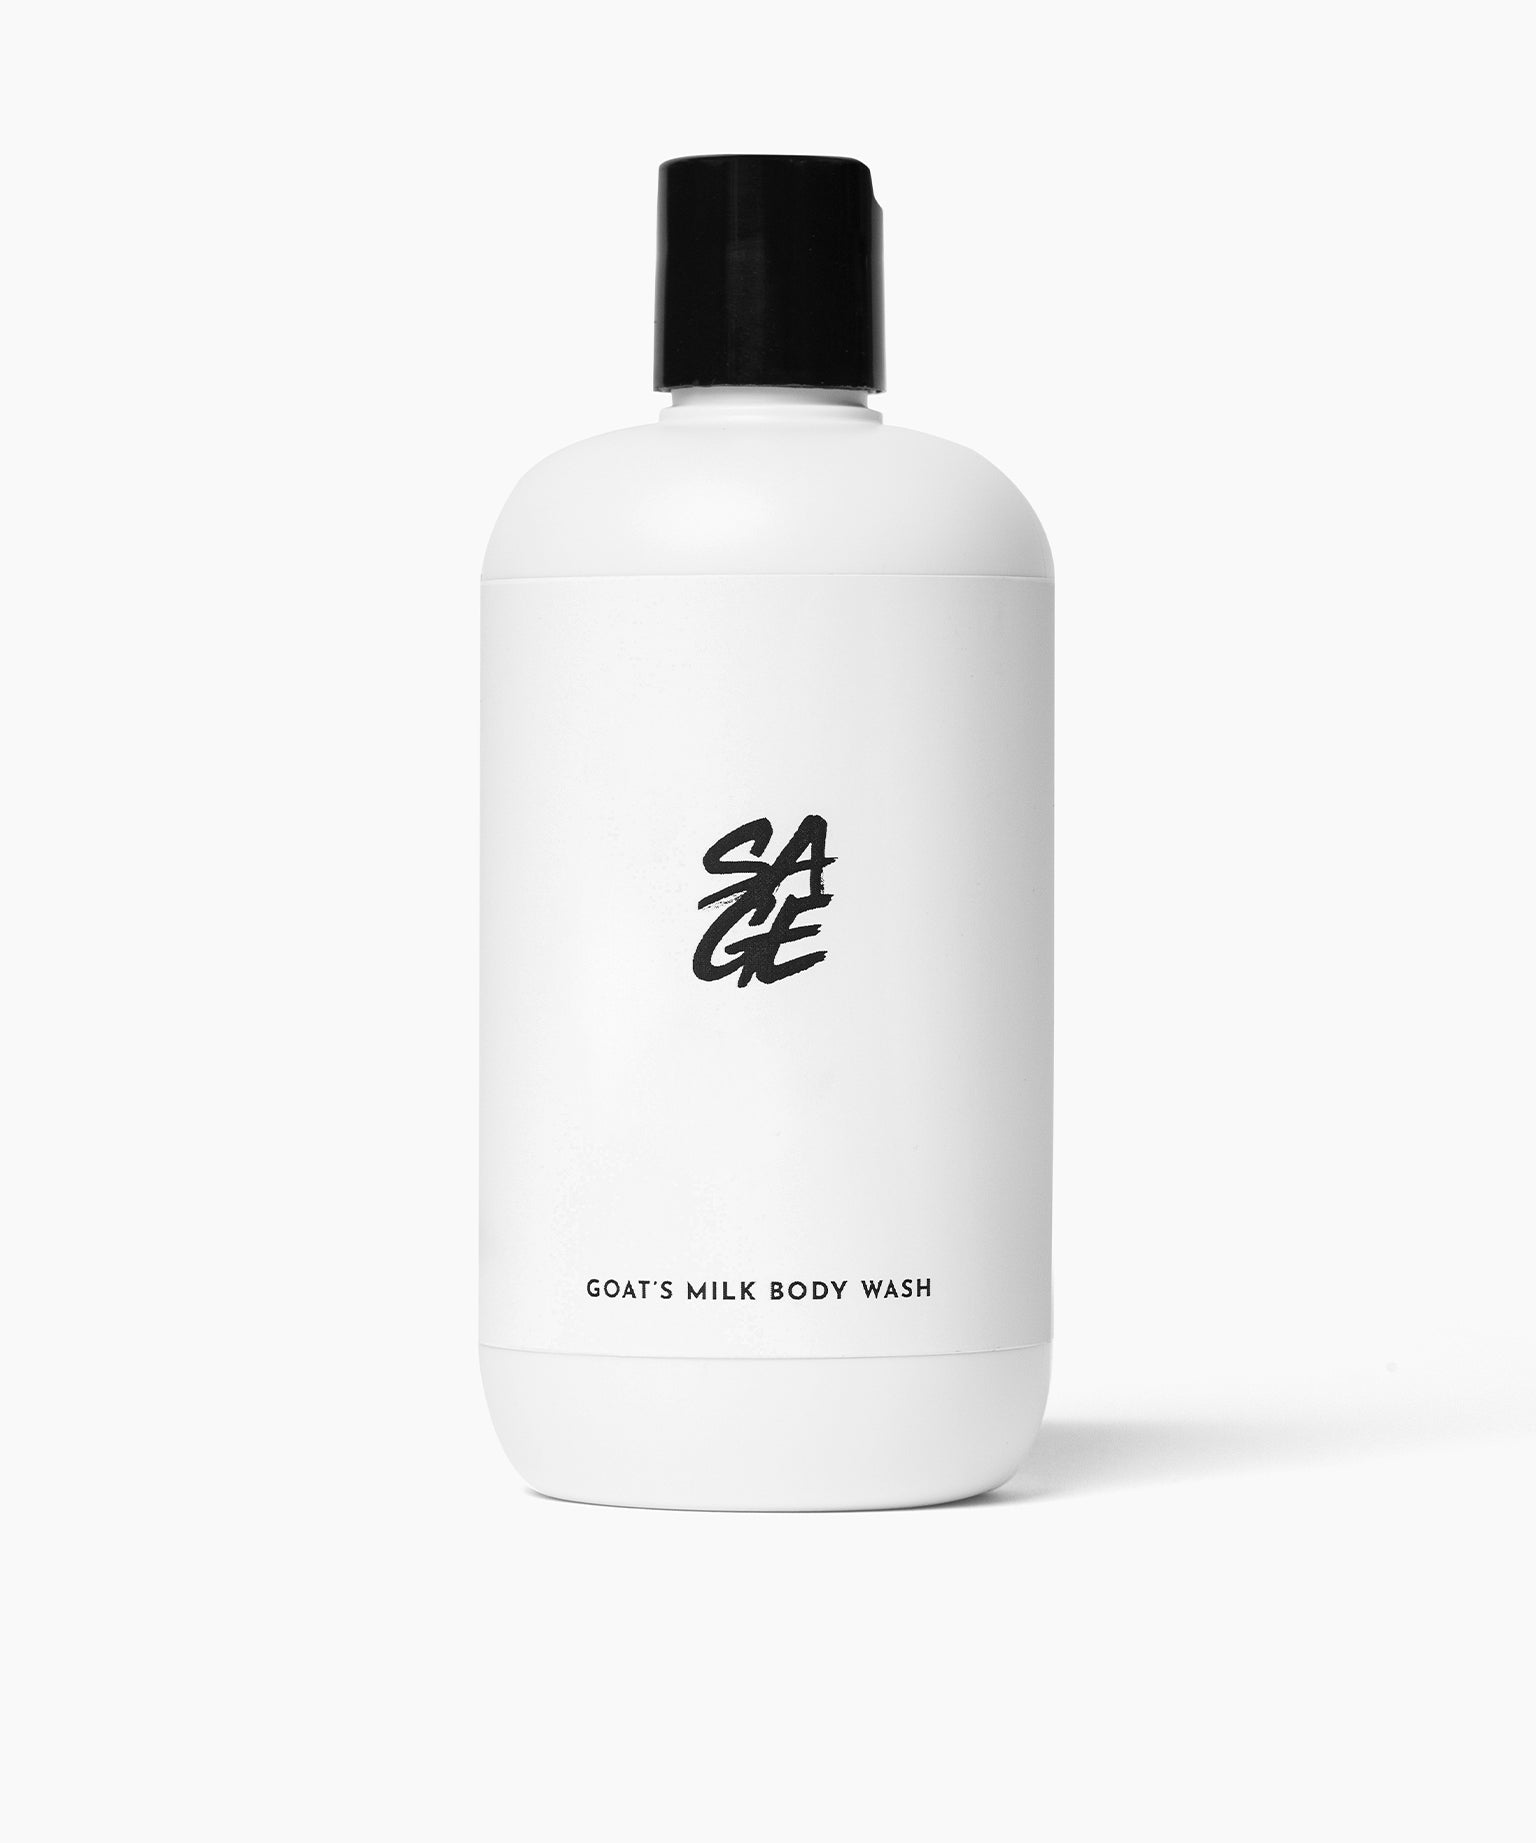 Naked (Unscented) Goat's Milk Body Wash - The Sage & Co.